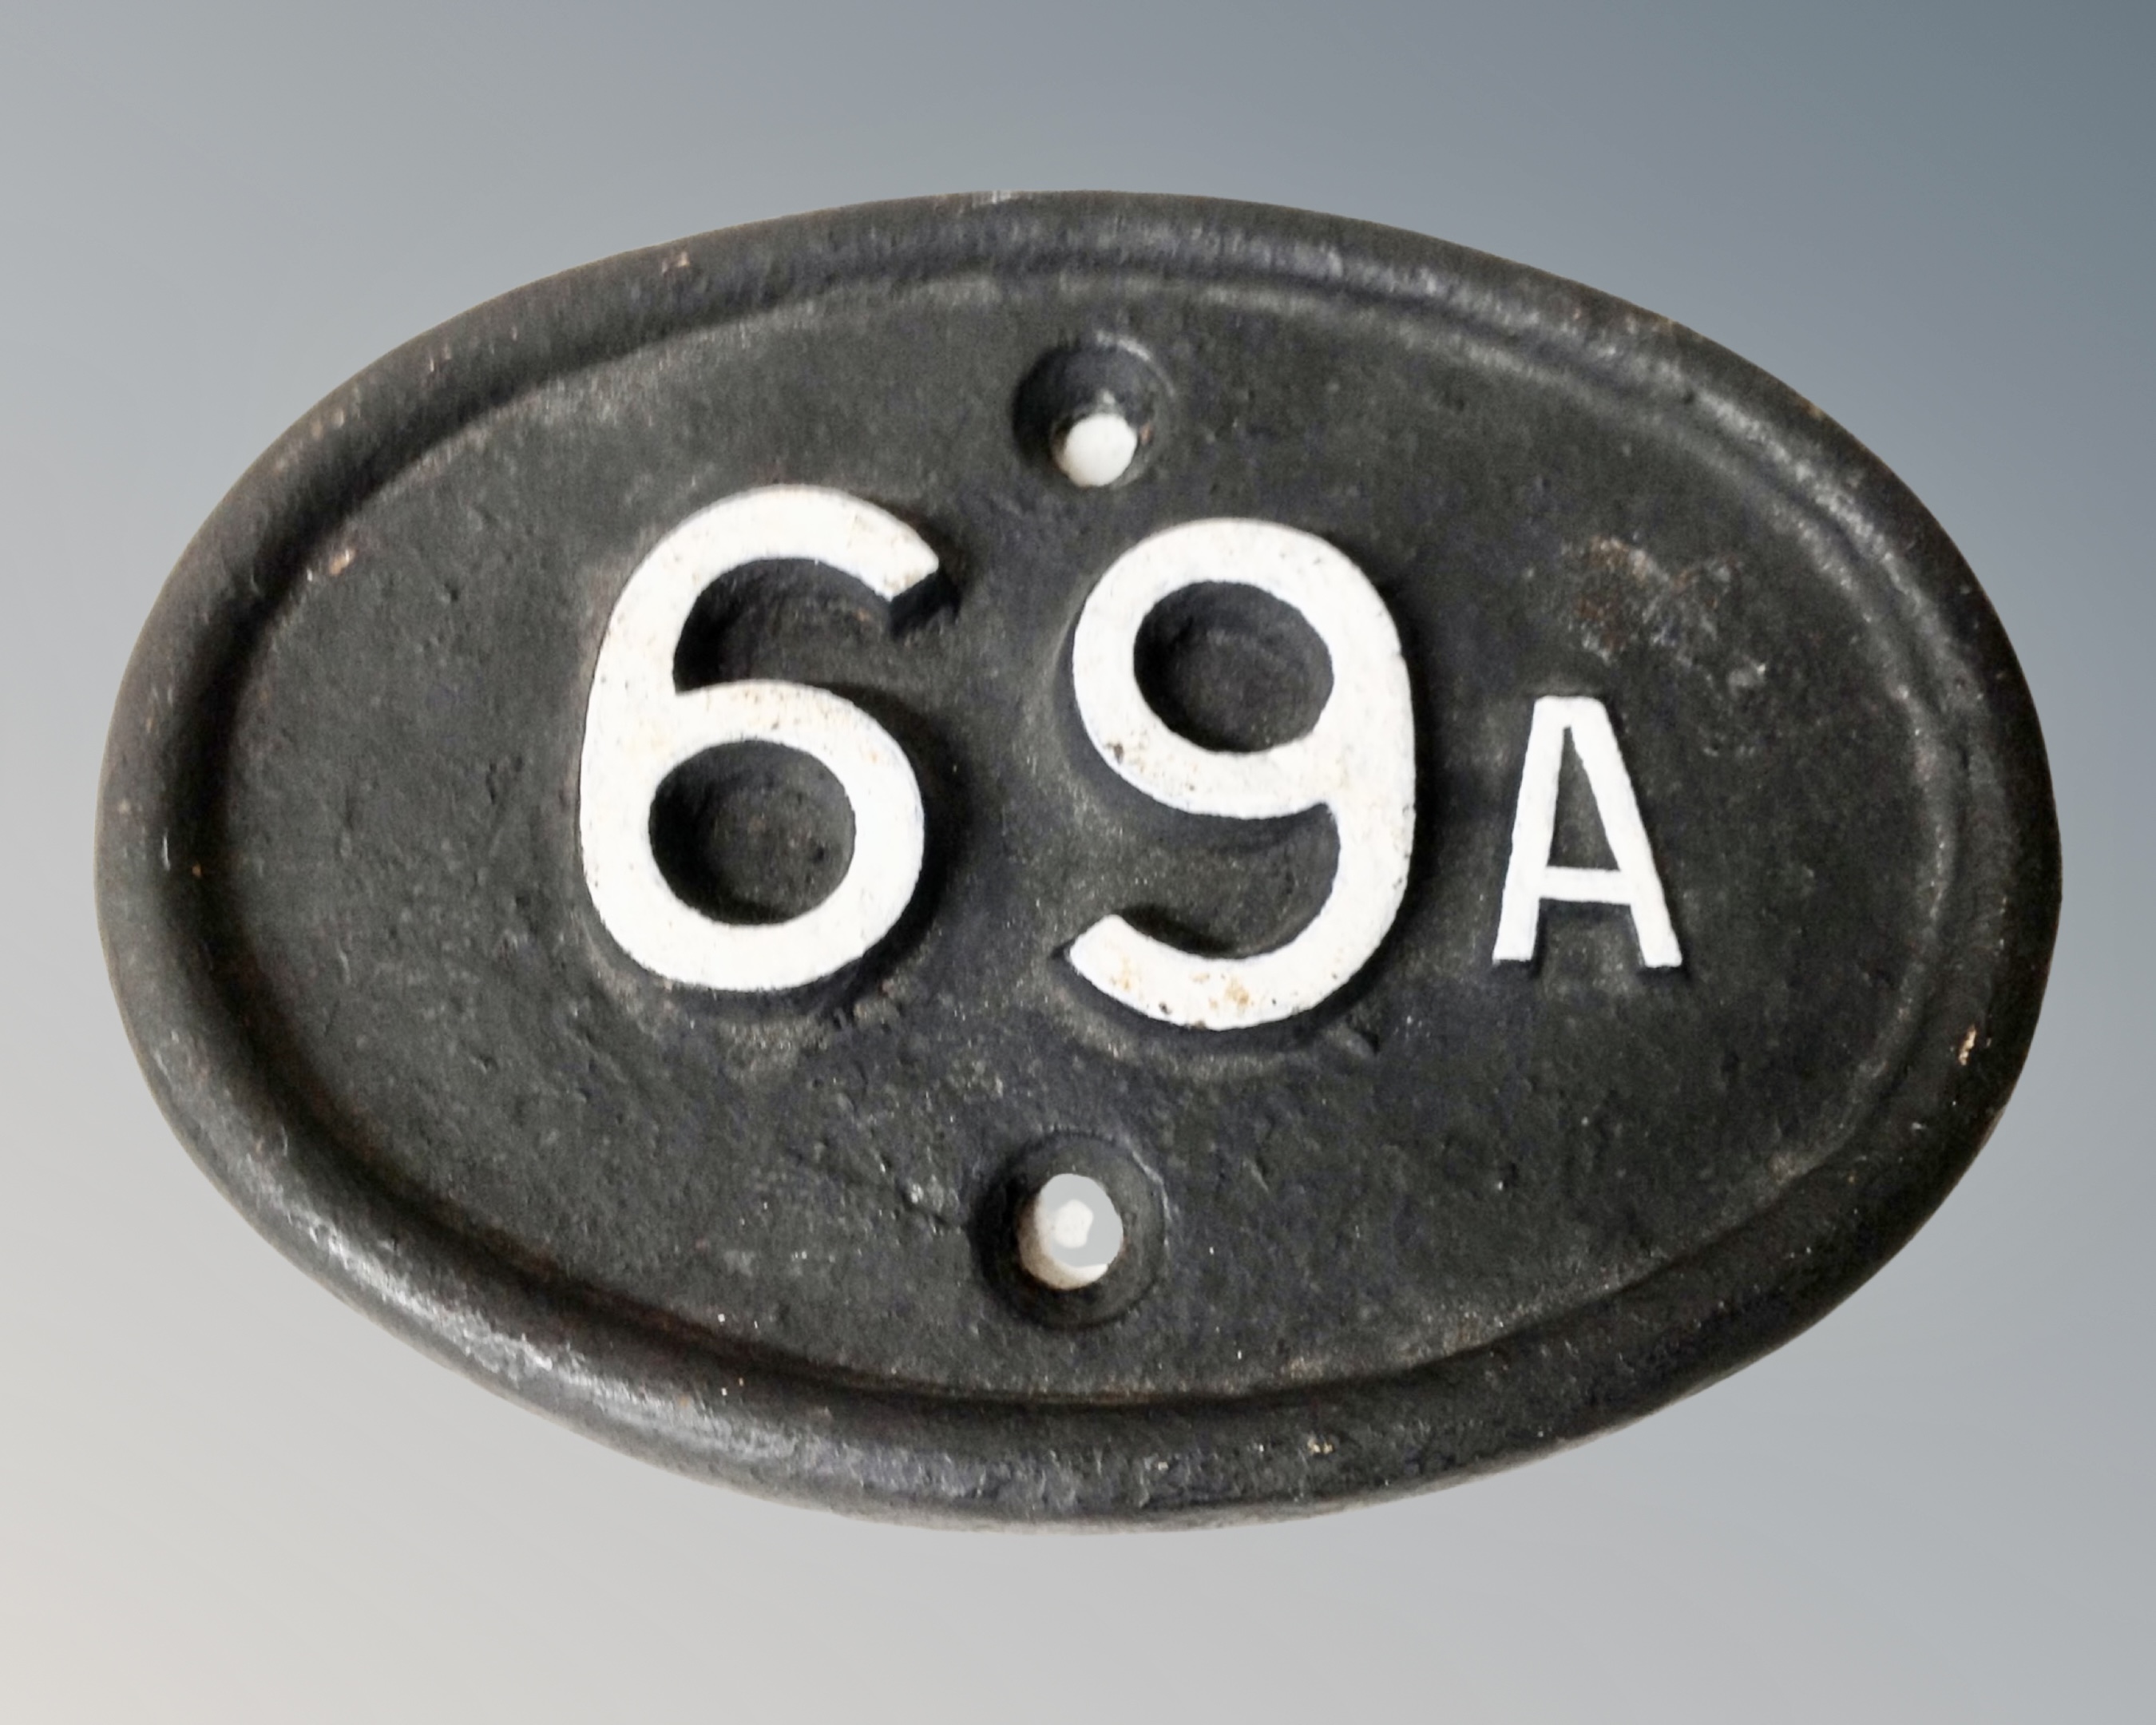 A cast iron British Railway shed marker from Finsbury Park in London, '69a'.